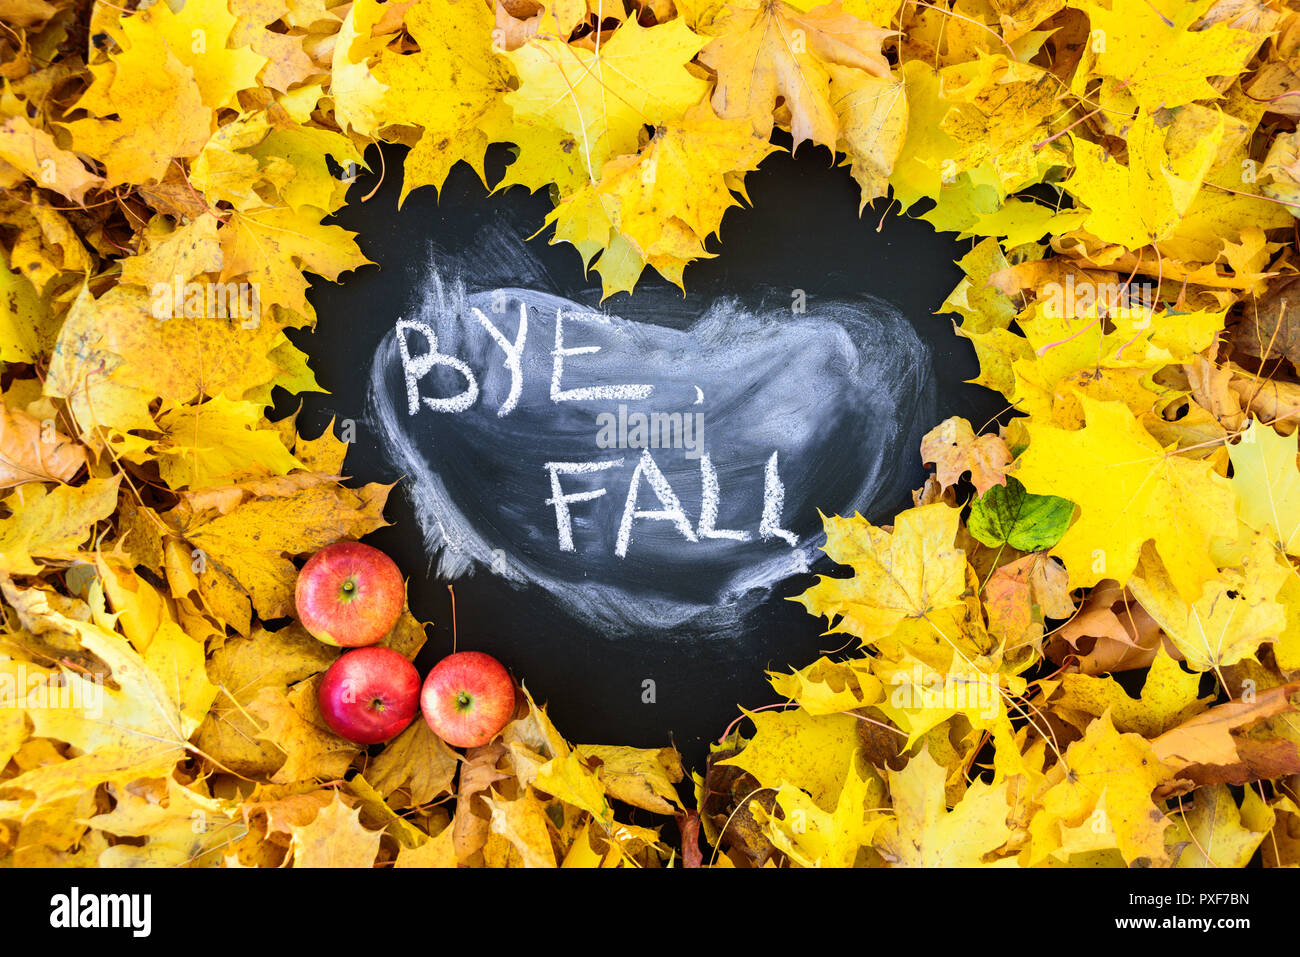 Blackboard with frame of leaves in heart shape. Word BYE FALL is written there Stock Photo